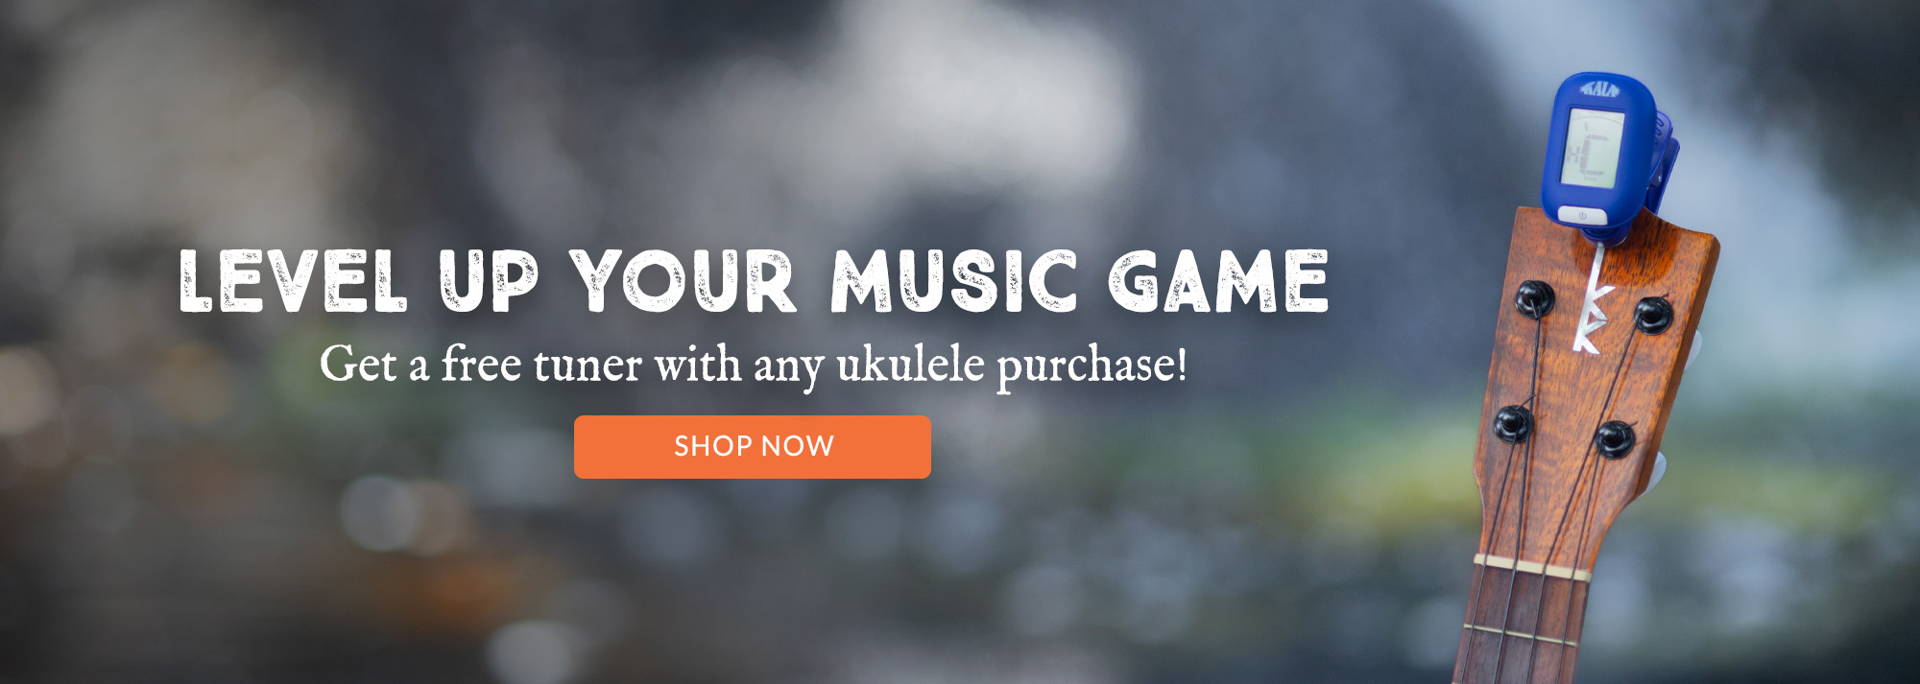 Level up your music game! Get a FREE tuner with any ukulele purchase!